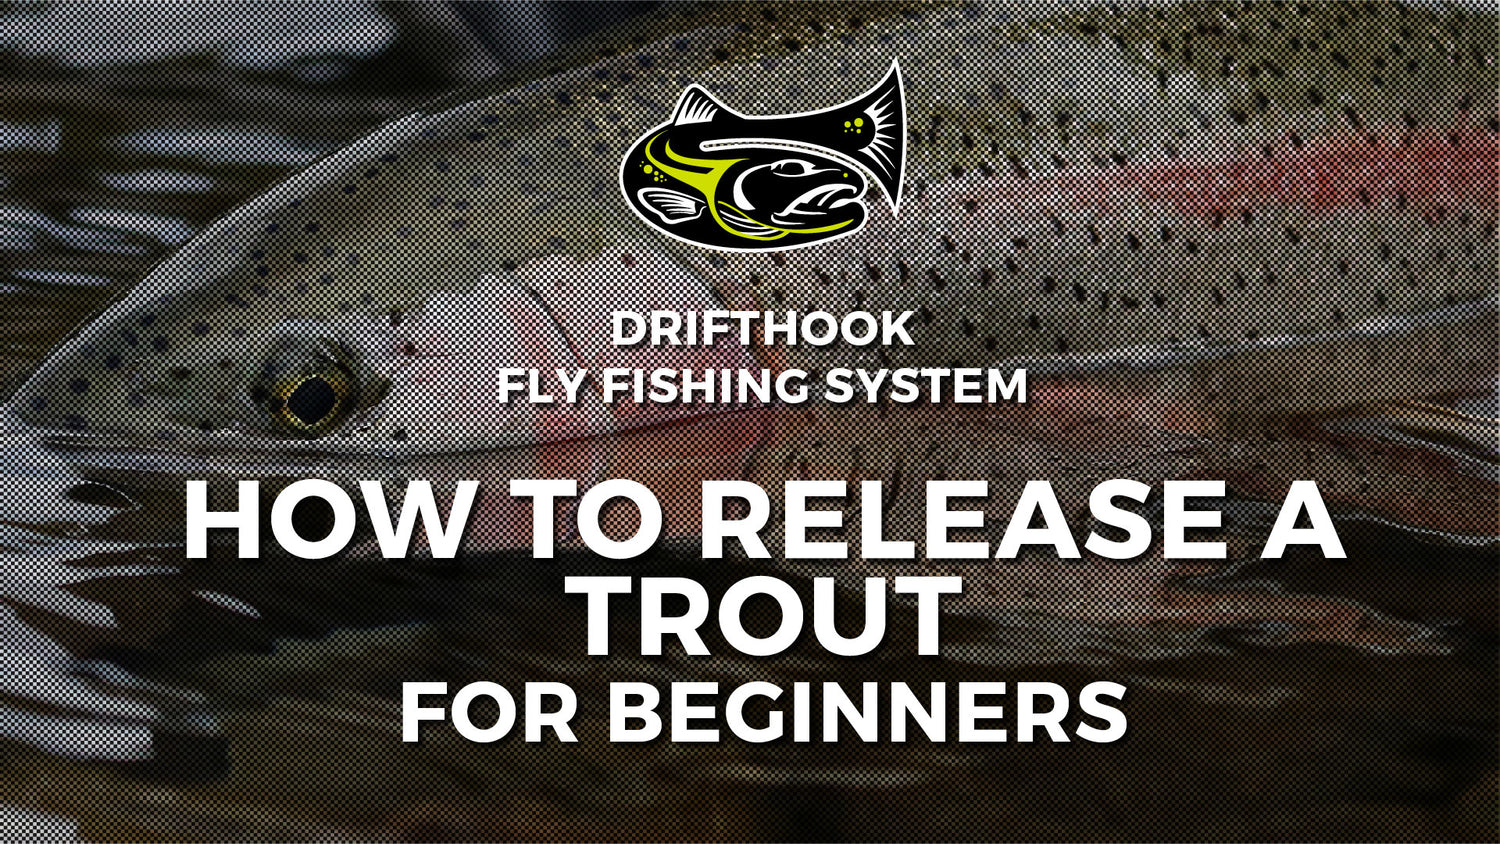 How To Release A Trout for Beginners